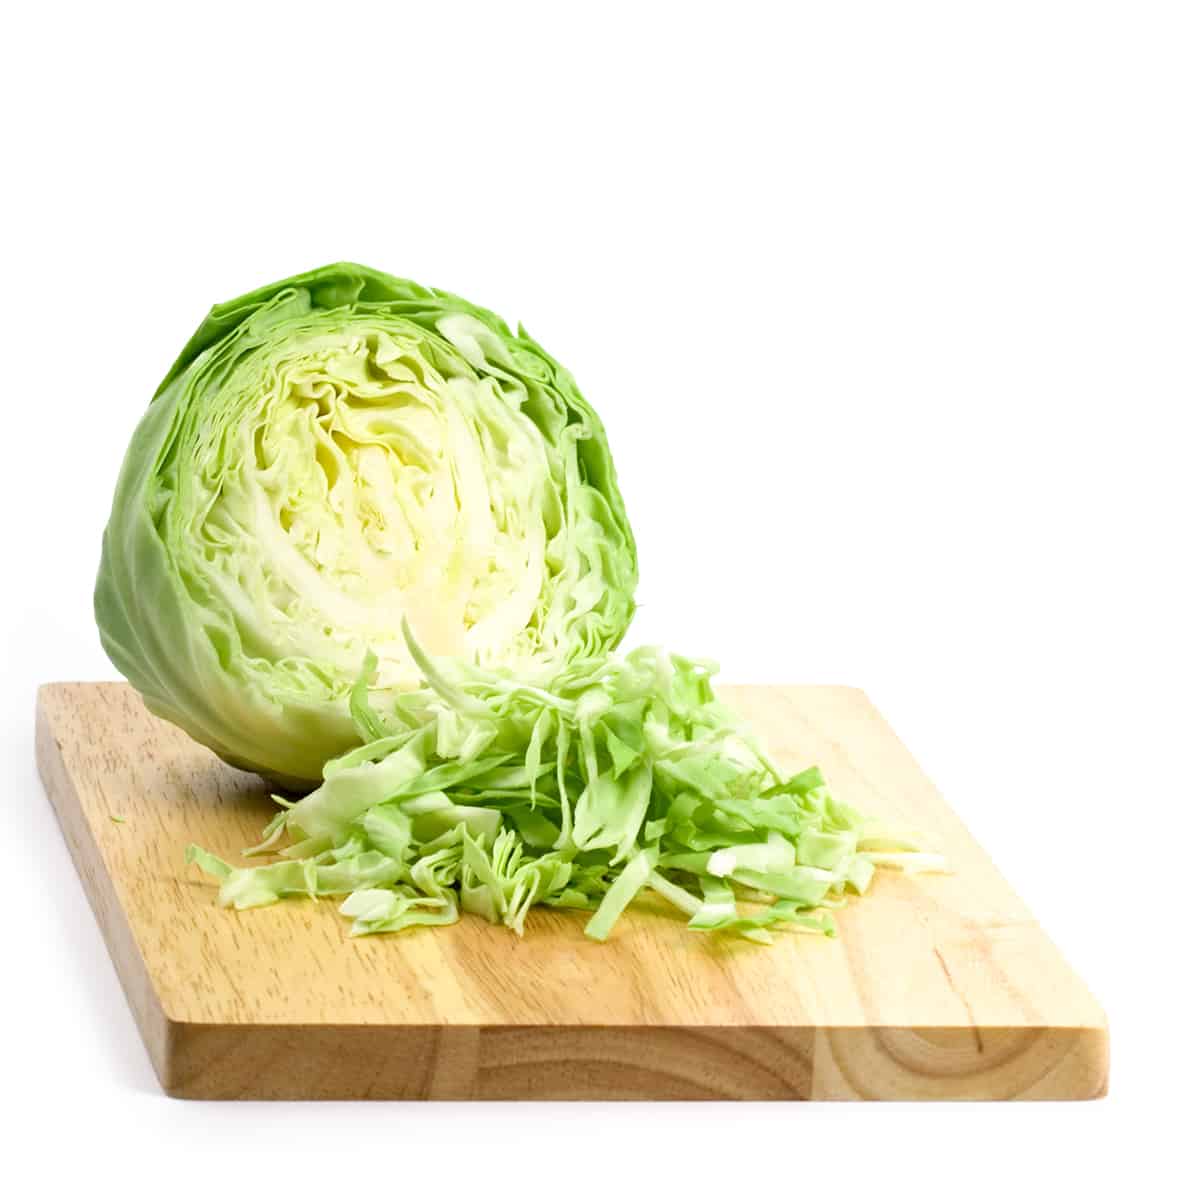 Do I Need to Cut the Cabbage Before Putting It Inside a Food Processor